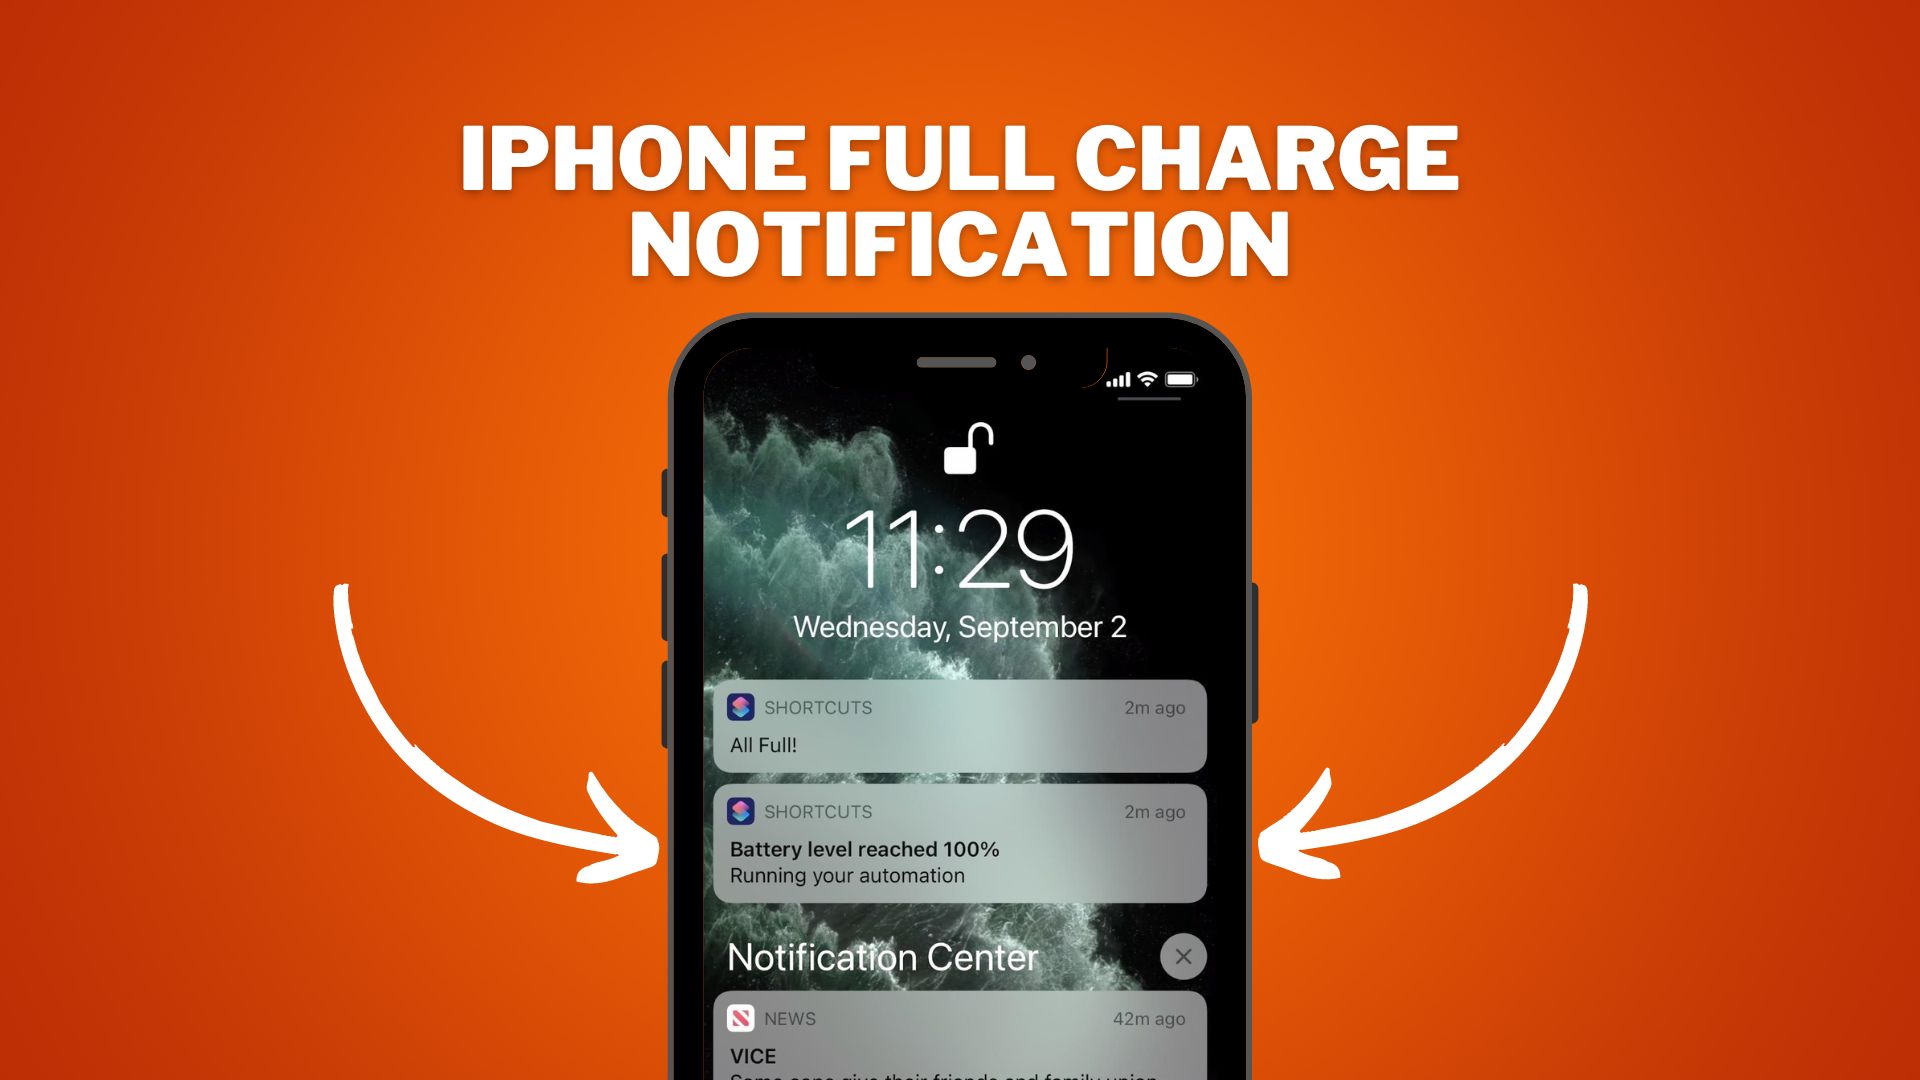 How to Get a Notification When Your iPhone is Fully Charged